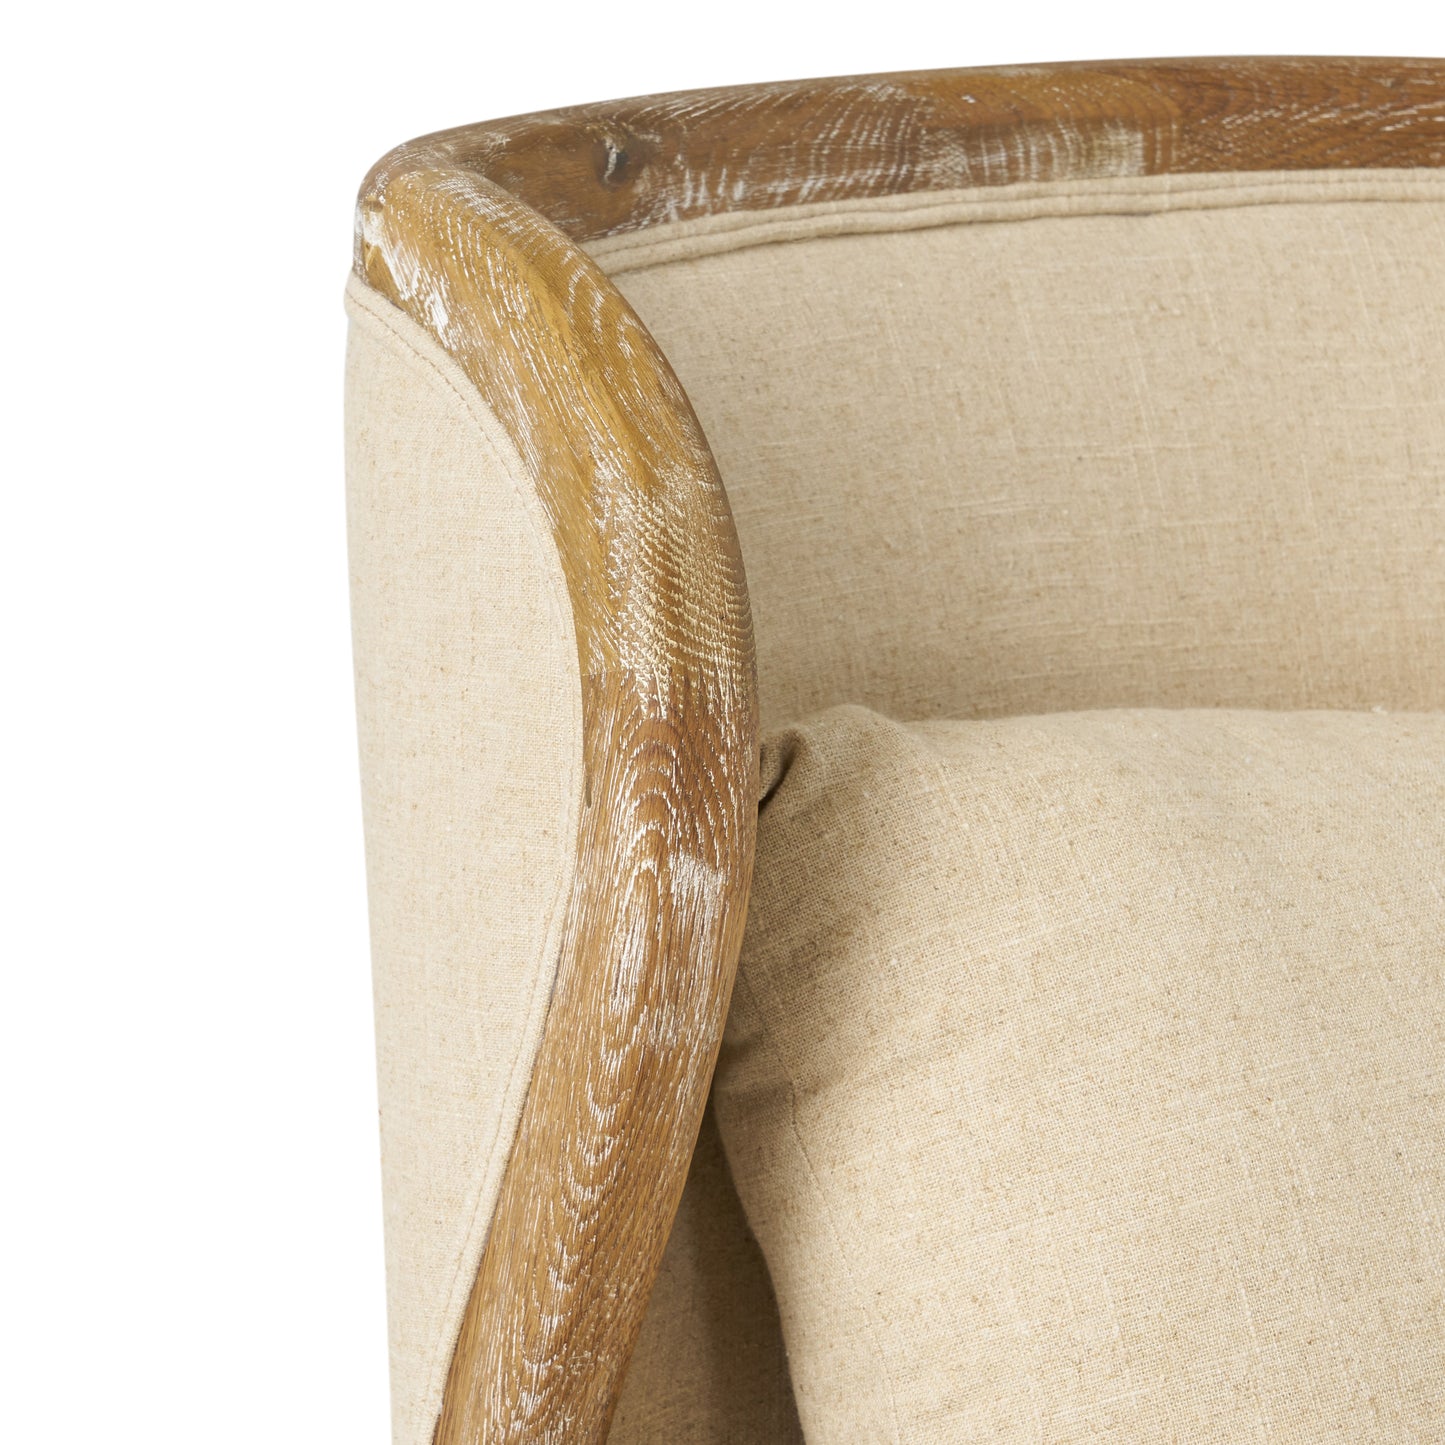 Milton Beige Fabric Wing Chair